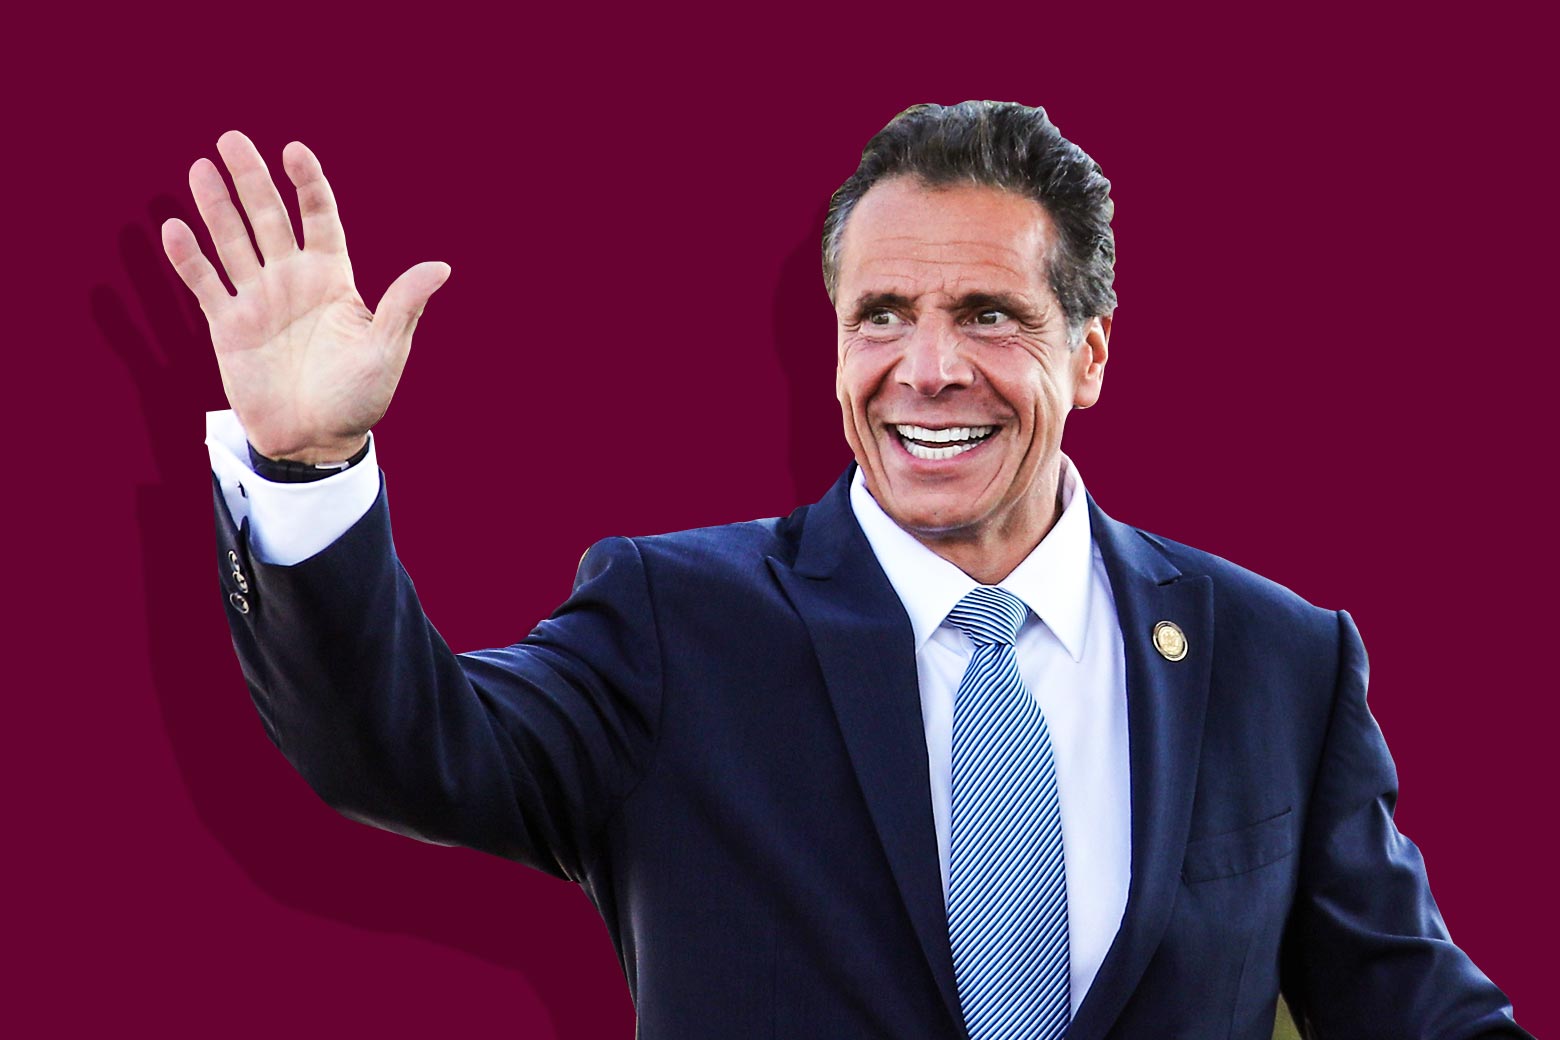 Andrew Cuomo smiles and waves.